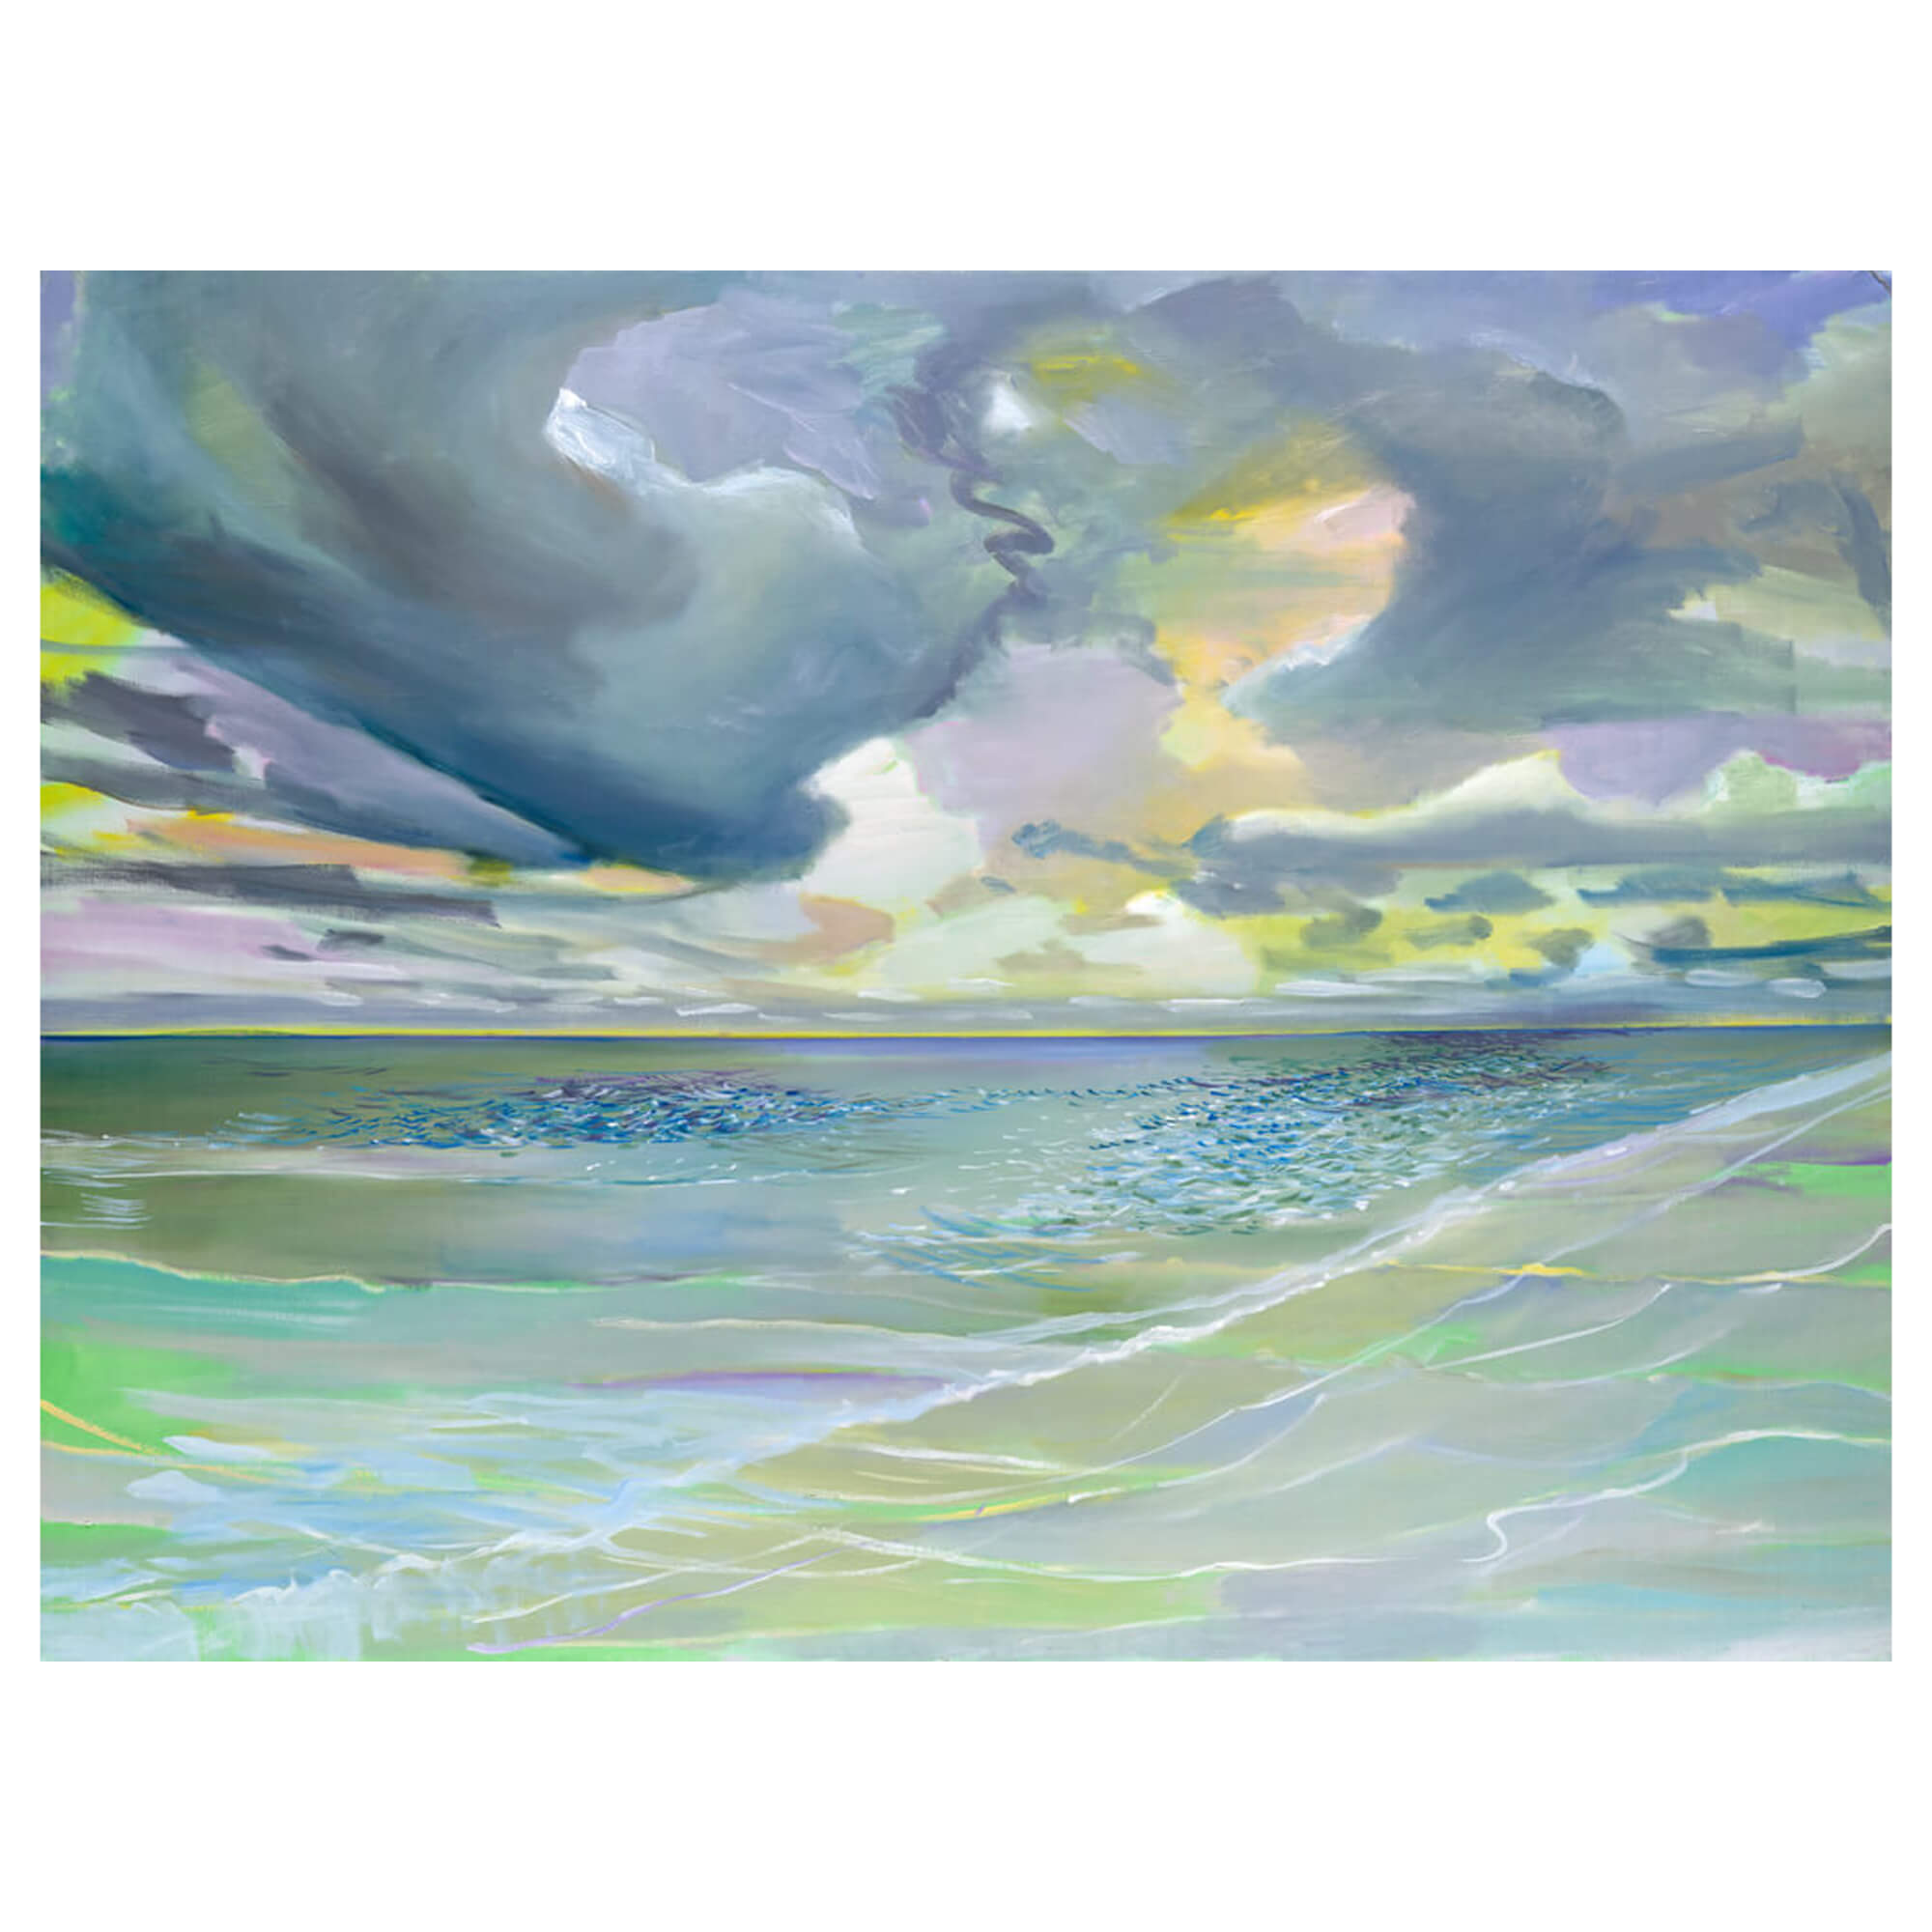 A paper art print of a serene seascape with the water reflecting yellow, green, blue, and teal hues by Hawaii artist Saumolia Puapuaga 